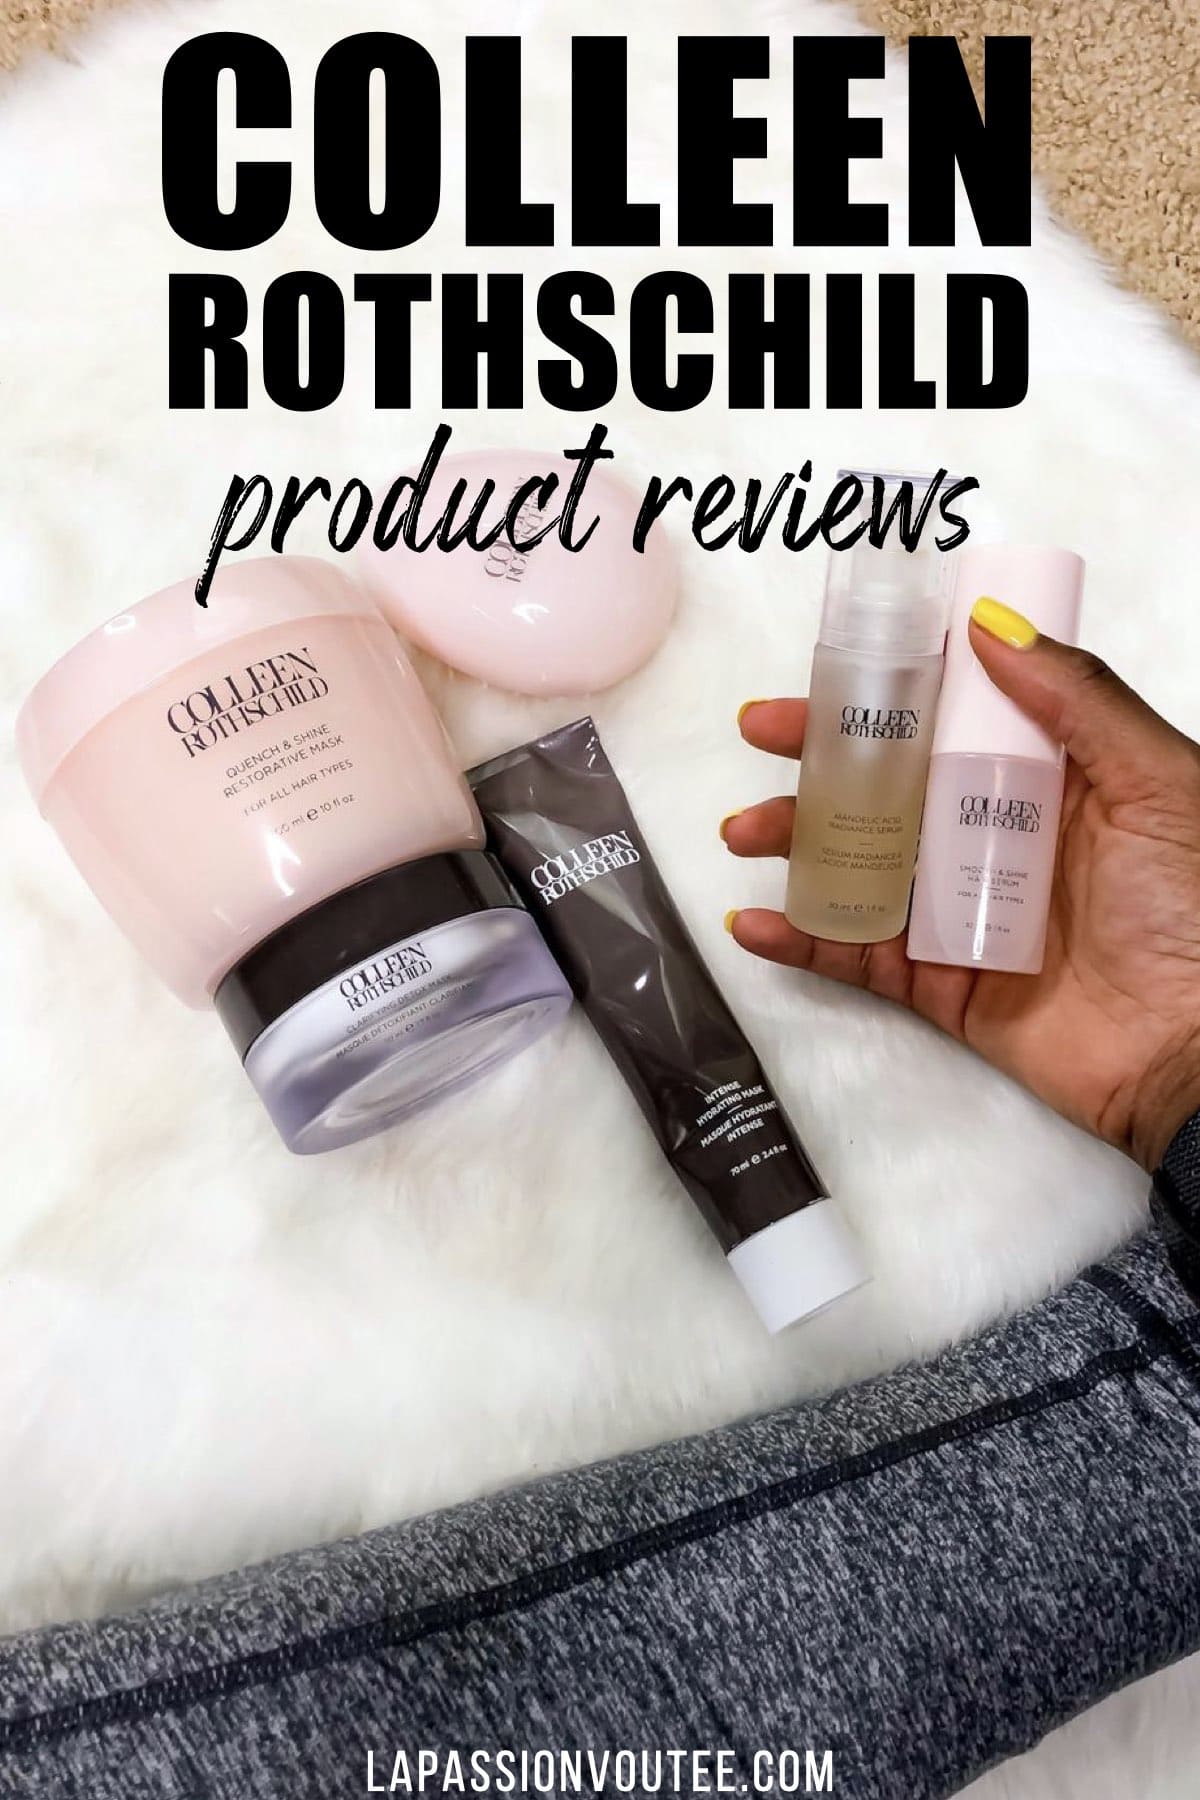 A detailed review about Colleen Rothschild products. Are the balms, serums, masks, and creams worth it?